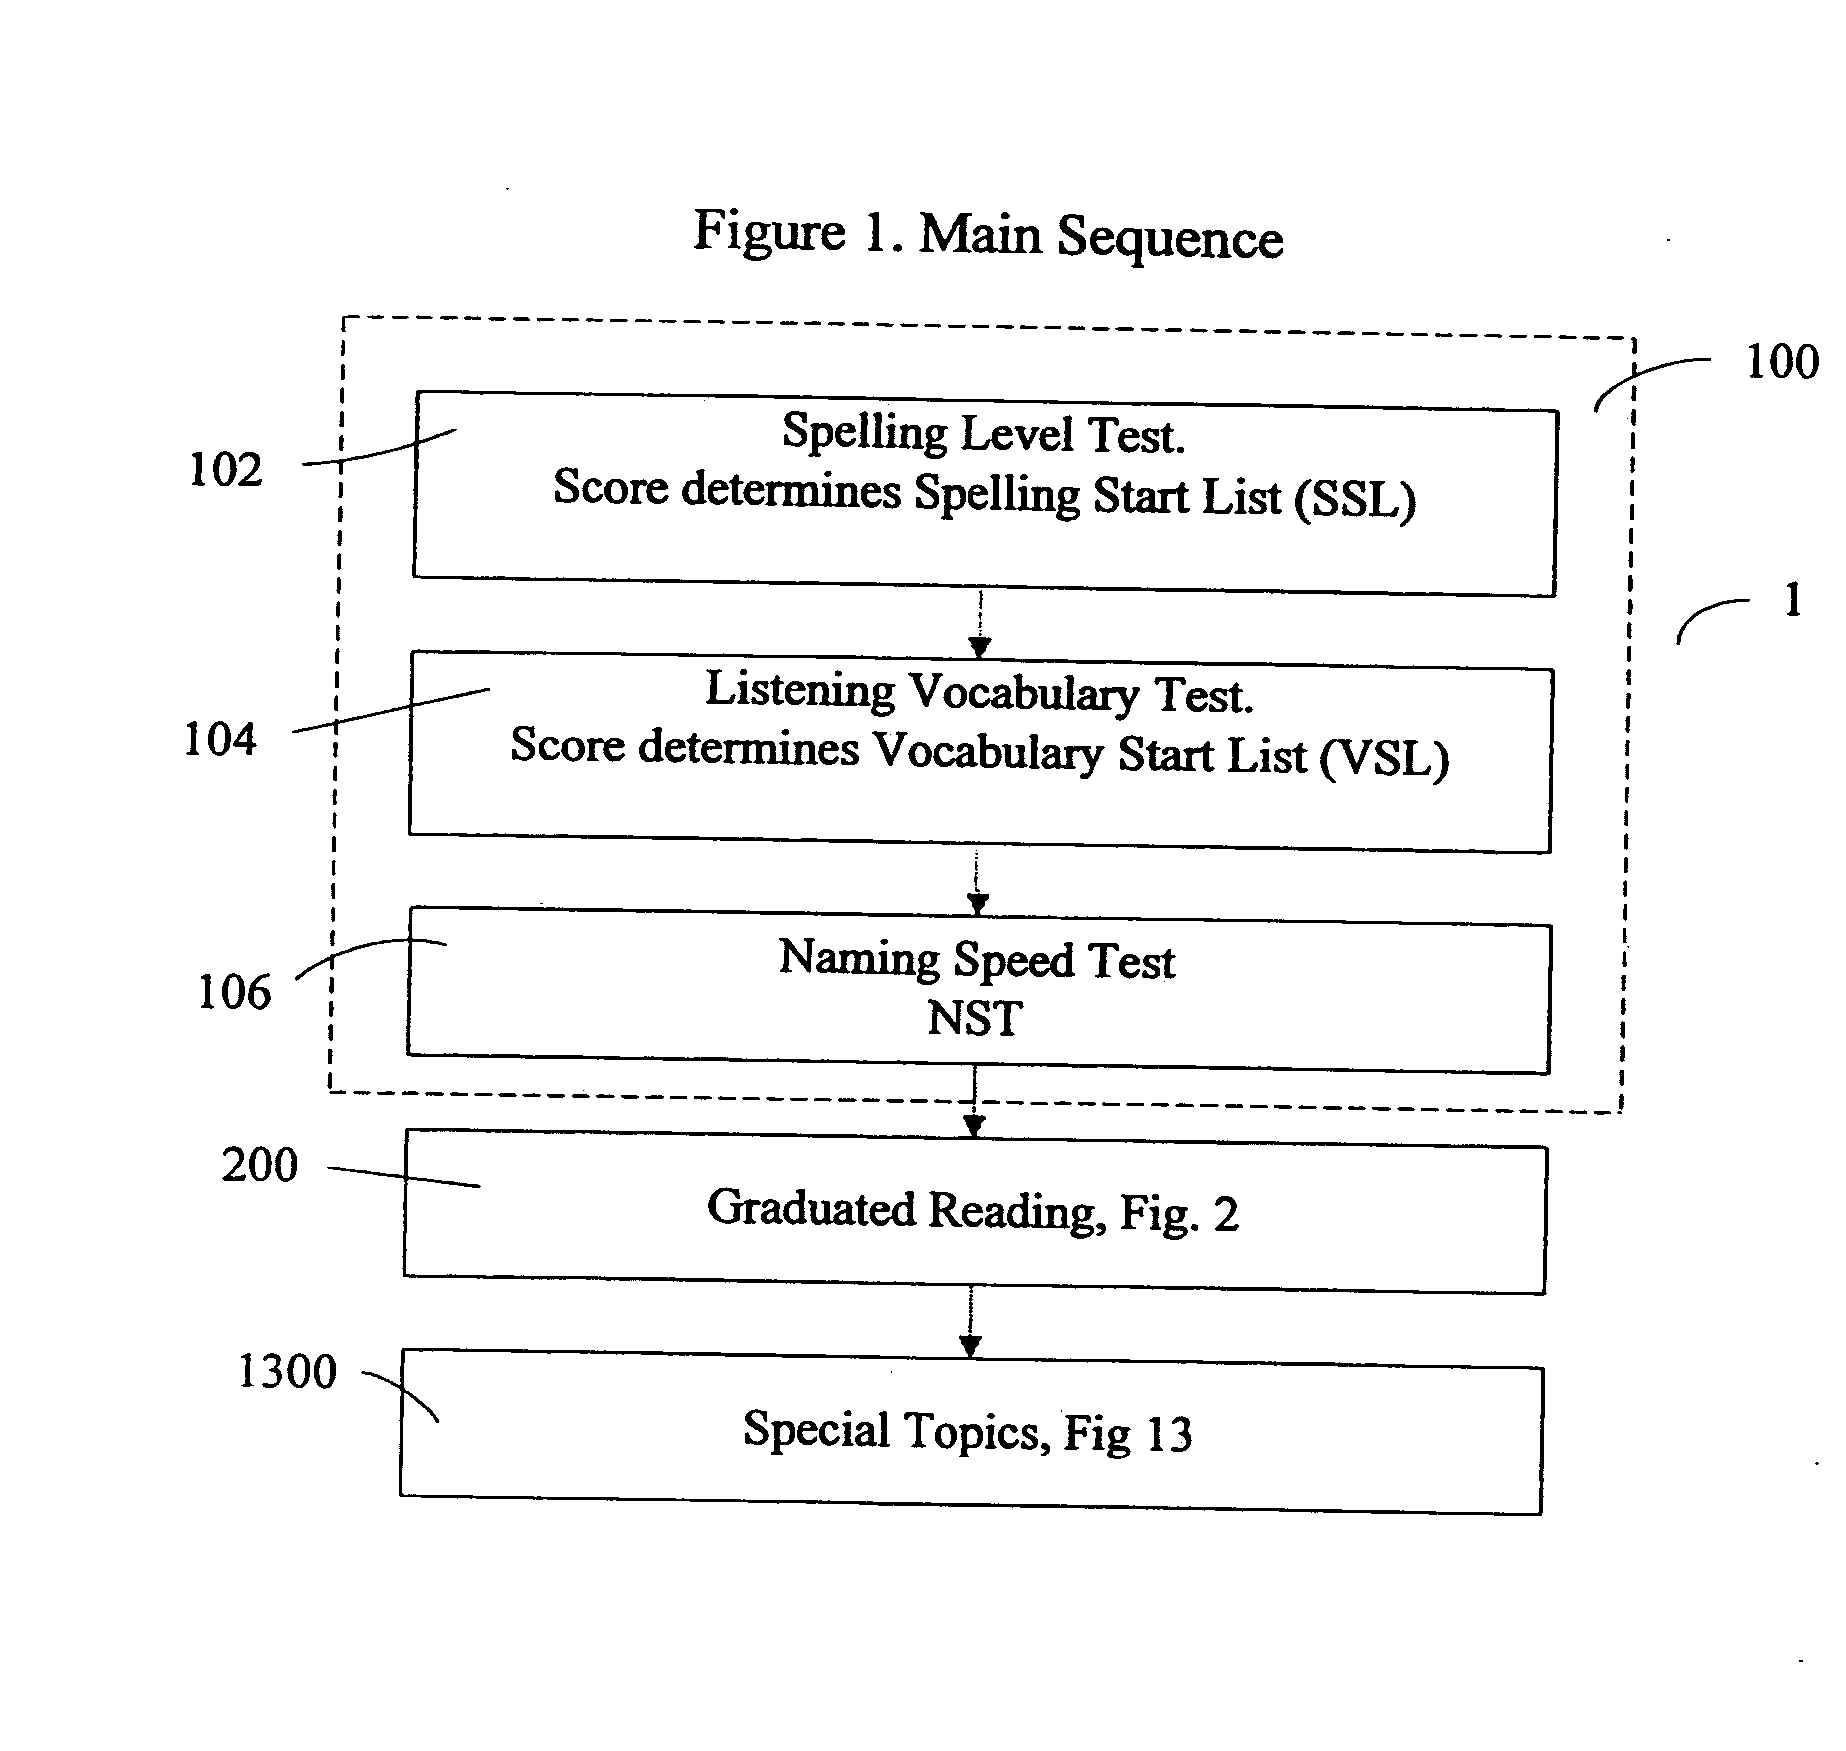 Computer assisted reading tutor apparatus and method